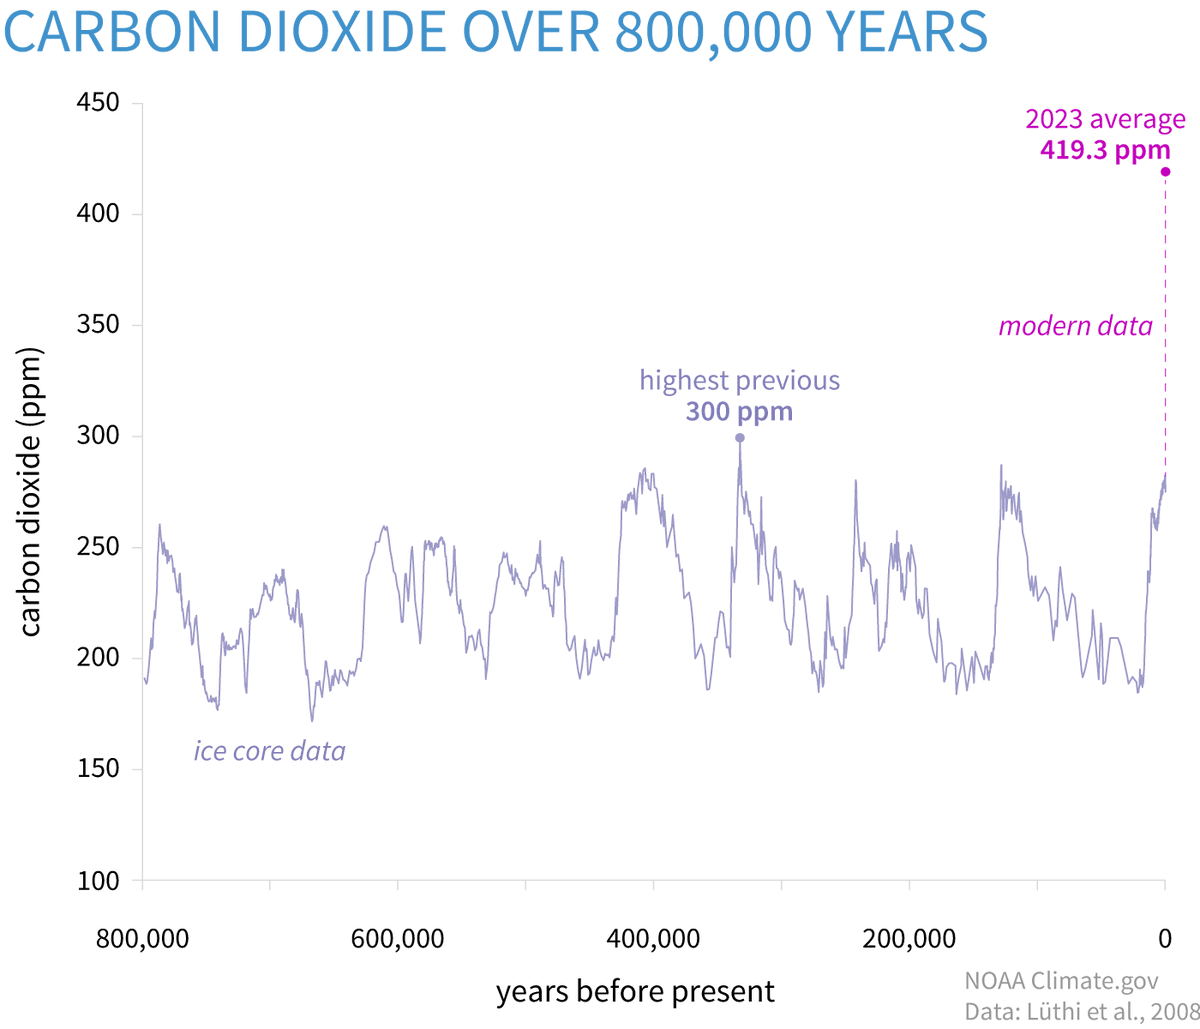 The amount of CO2 in the atmosphere today is comparable to around 4.3 million years ago, when sea level was about 75 ft higher than today, the average temp was 7 degrees F higher than in pre-industrial times, & large forests occupied areas of the Arctic that are now tundra.